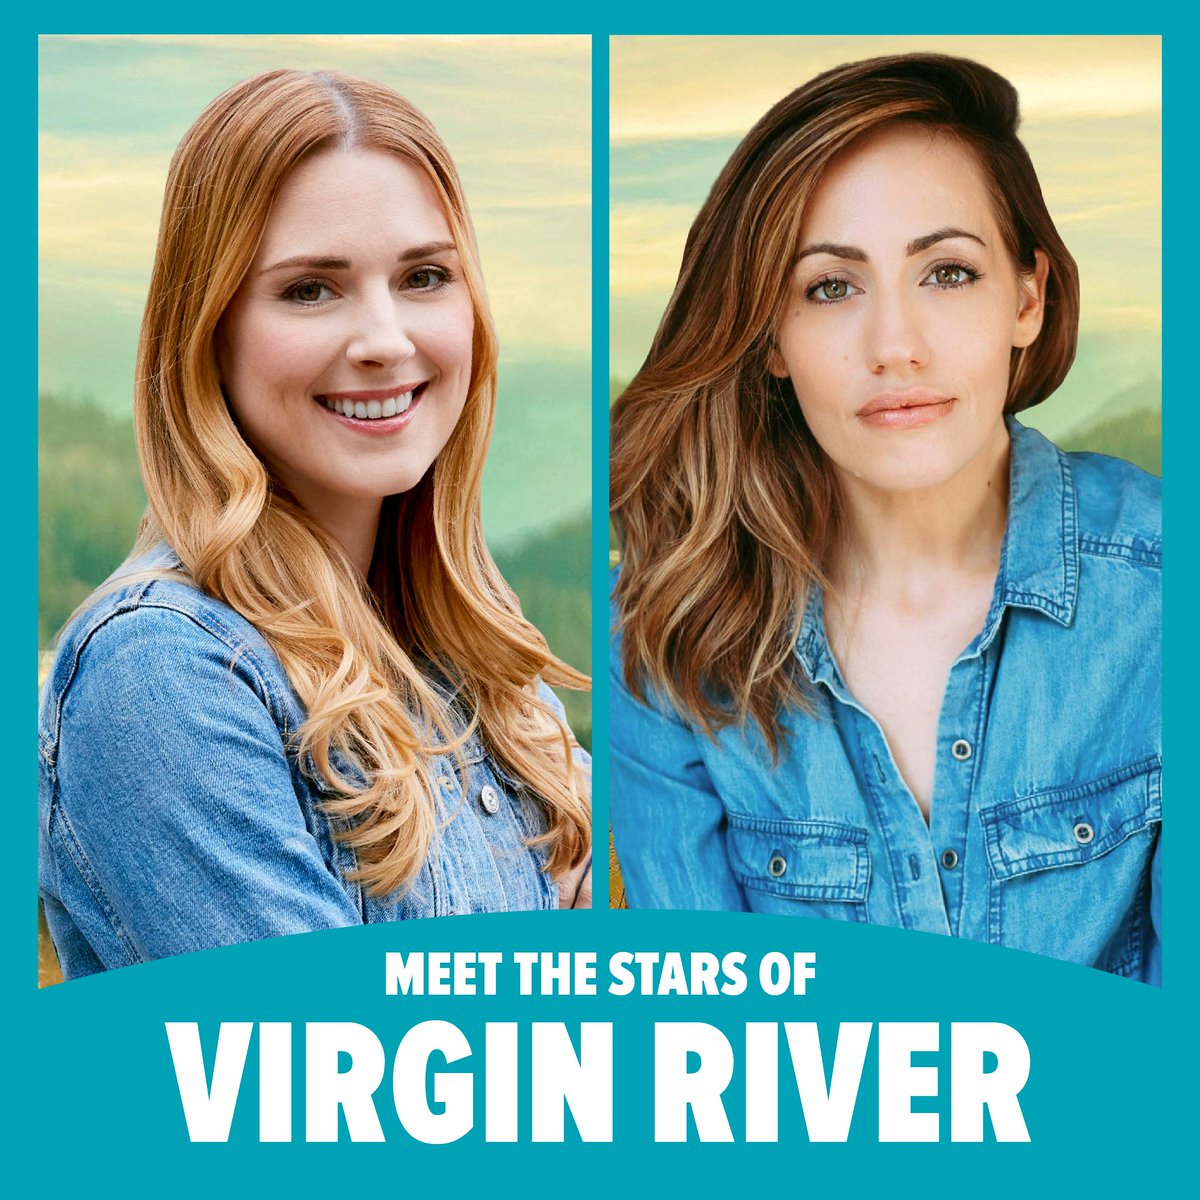 Mel and Brie are leaving Virgin River and coming to Vancouver. Meet Alexandra Breckenridge and Zibby Allen at FAN EXPO this month. Get your tickets today. spr.ly/6015VuukJ